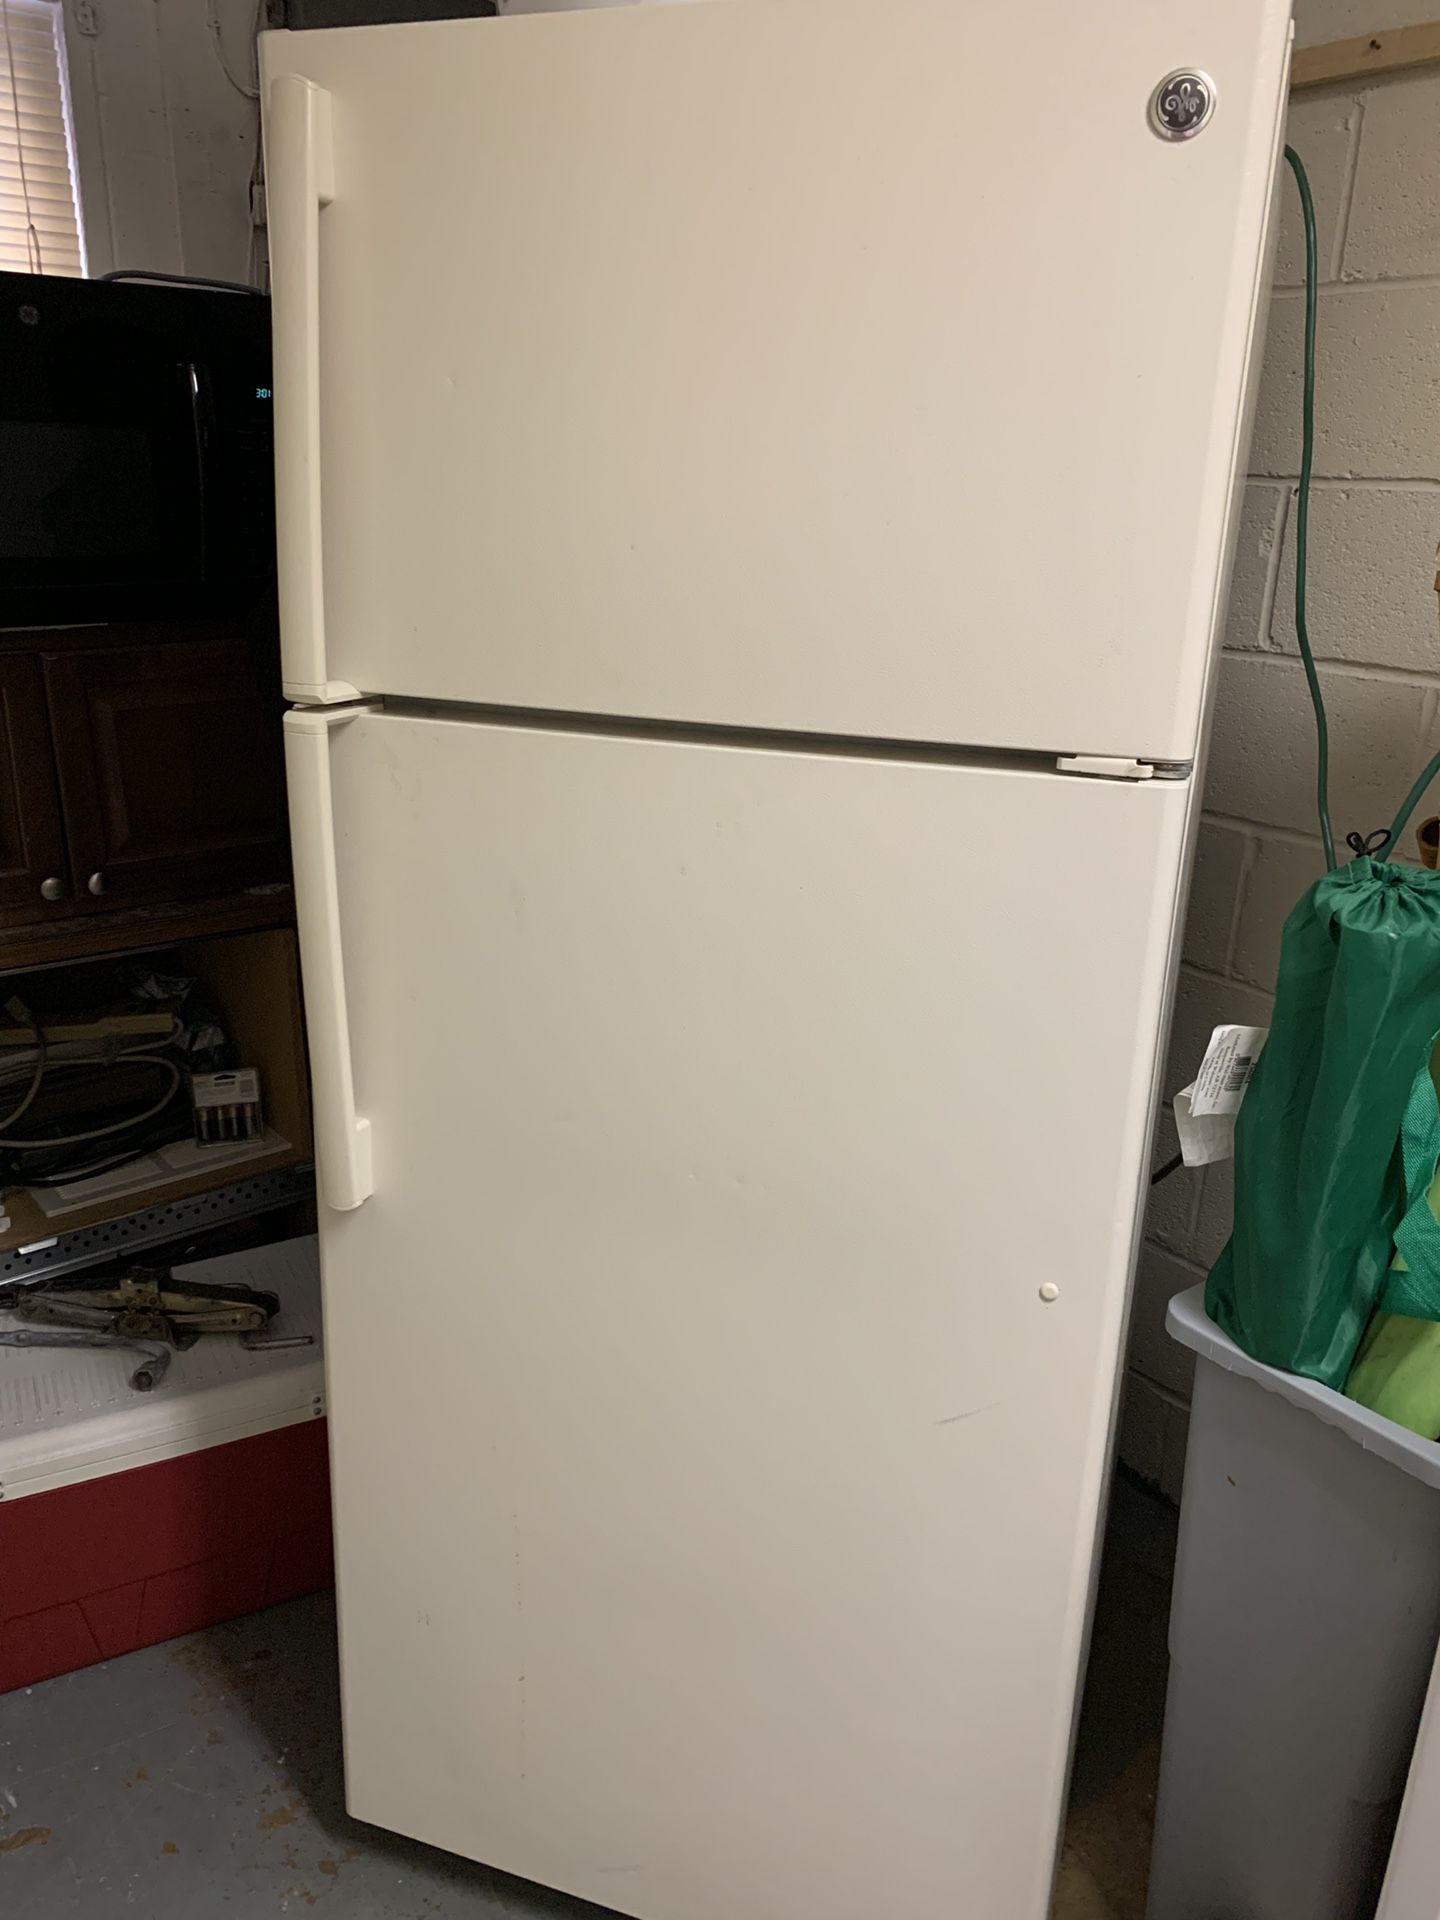 GE Cream Refrigerator with two doors in perfect condition working very good.